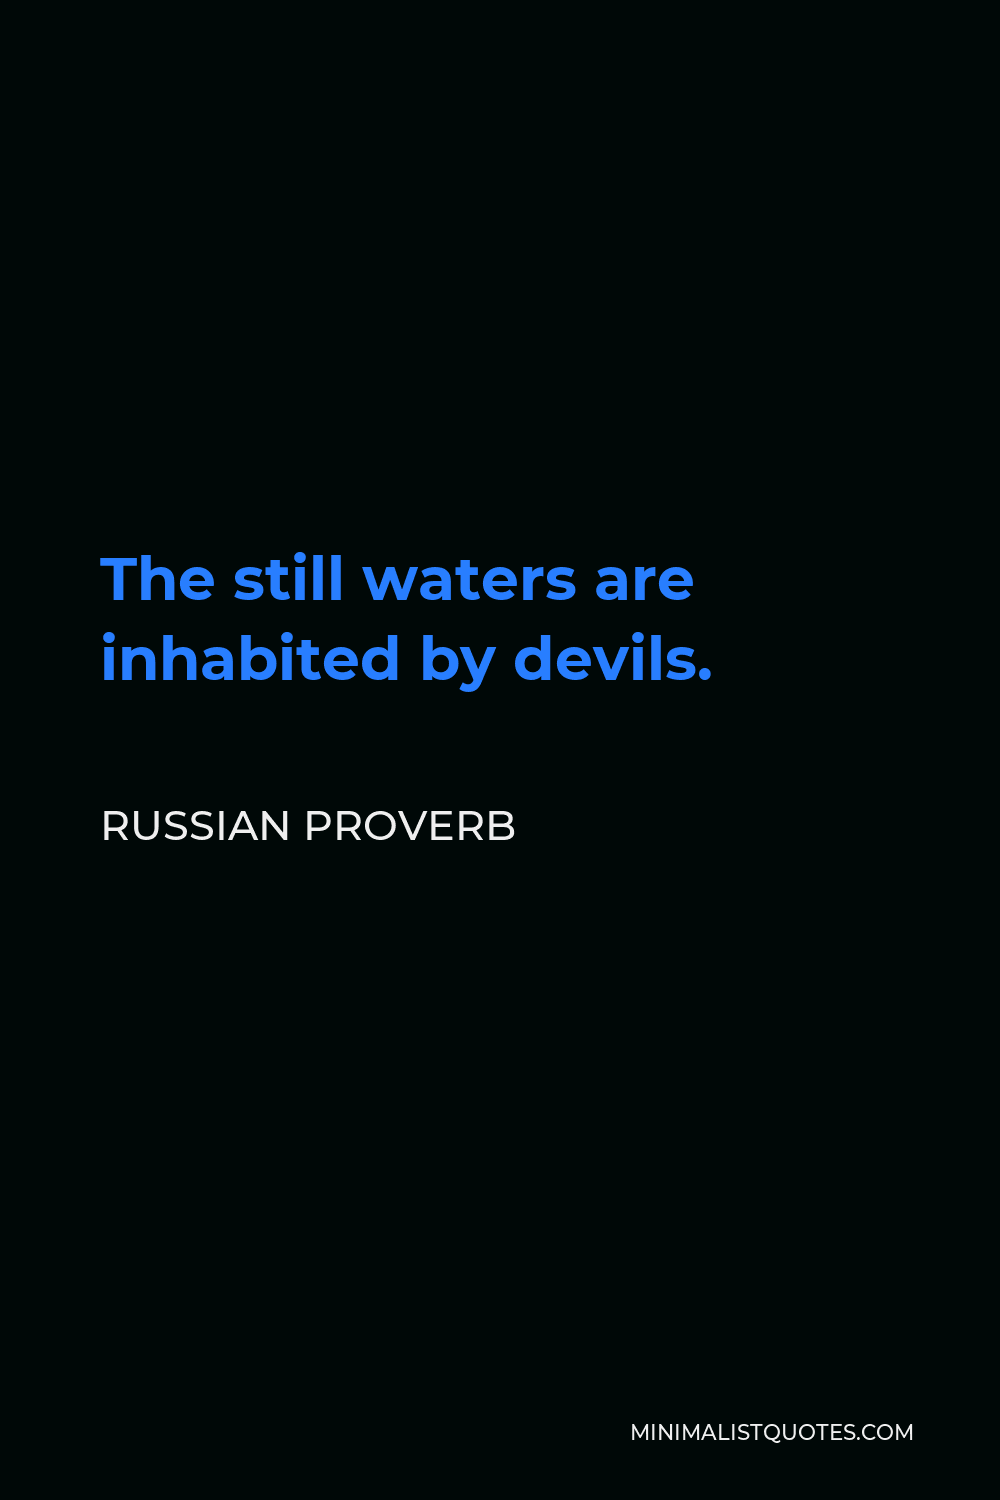 Russian Proverb Quote - The still waters are inhabited by devils.